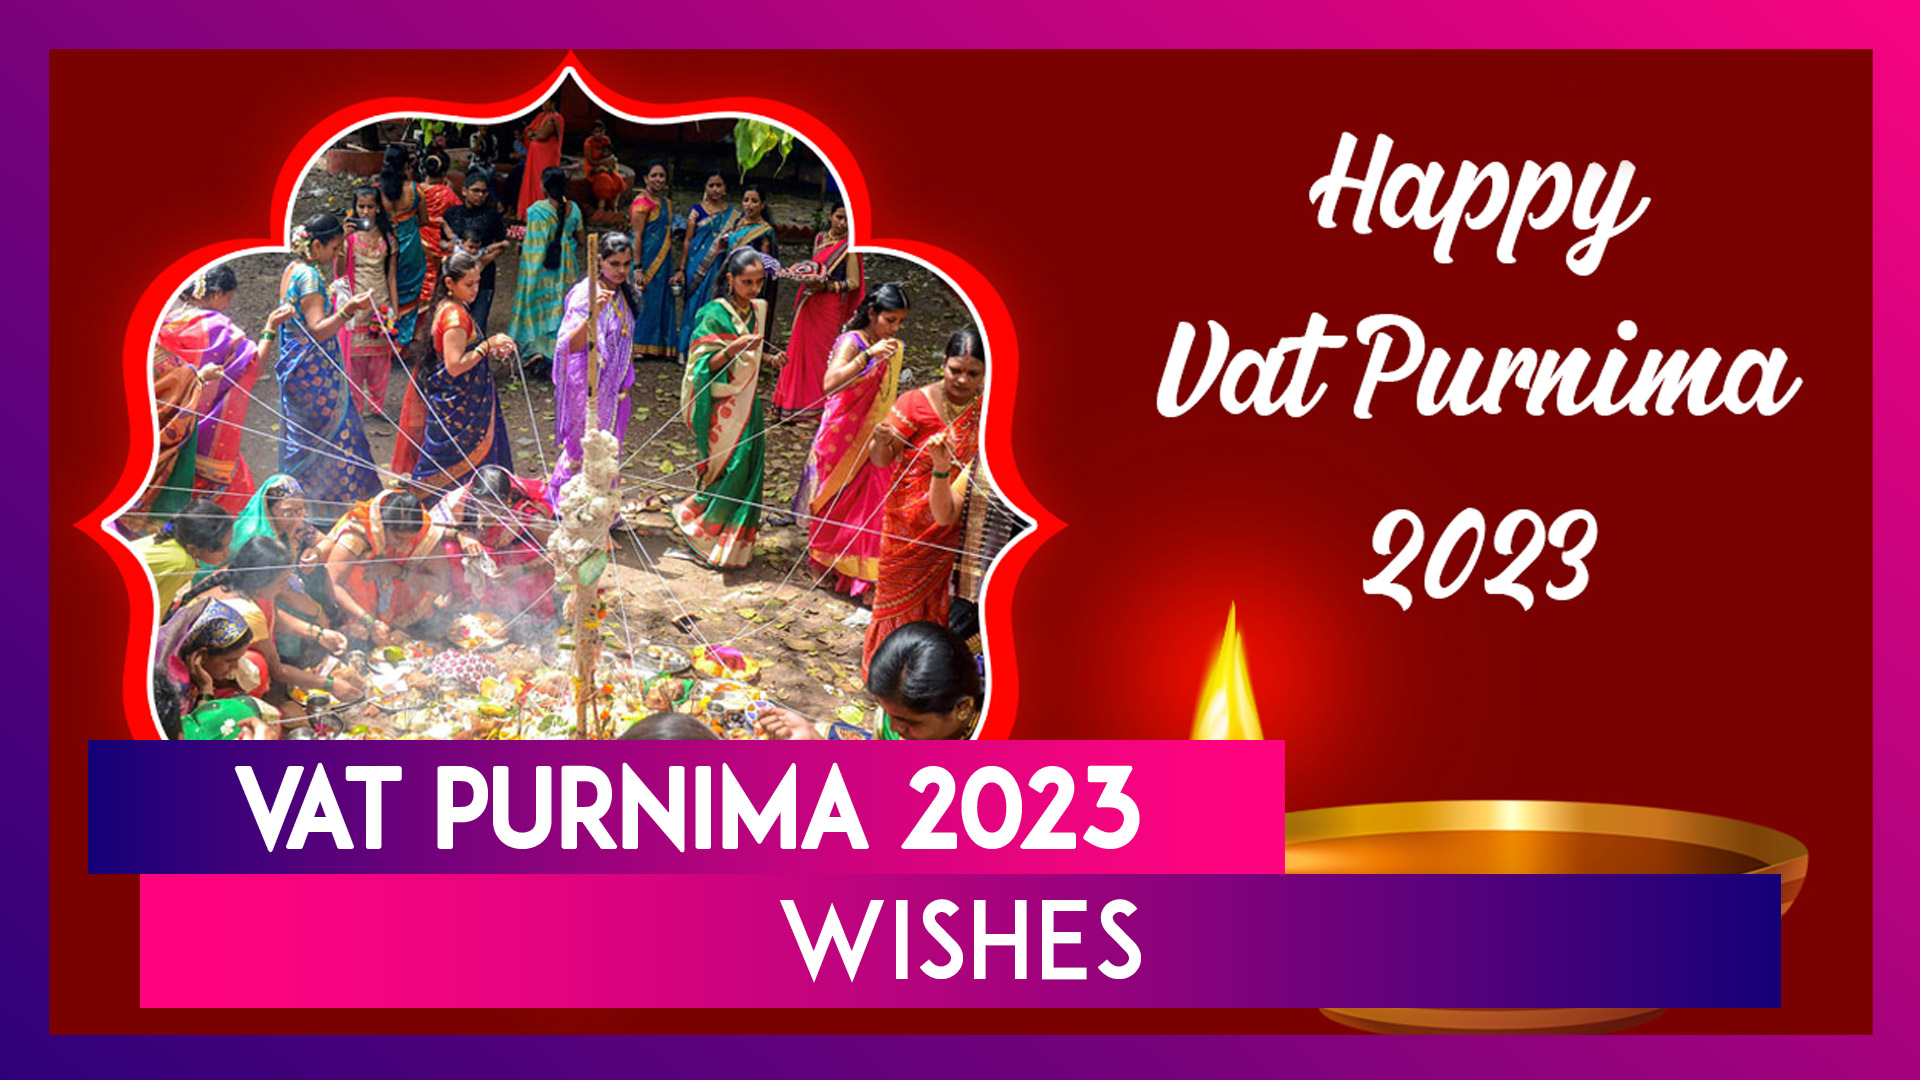 Vat Purnima 2023 Wishes: Messages, Greetings & Images To Share With Women Celebrating the Festival